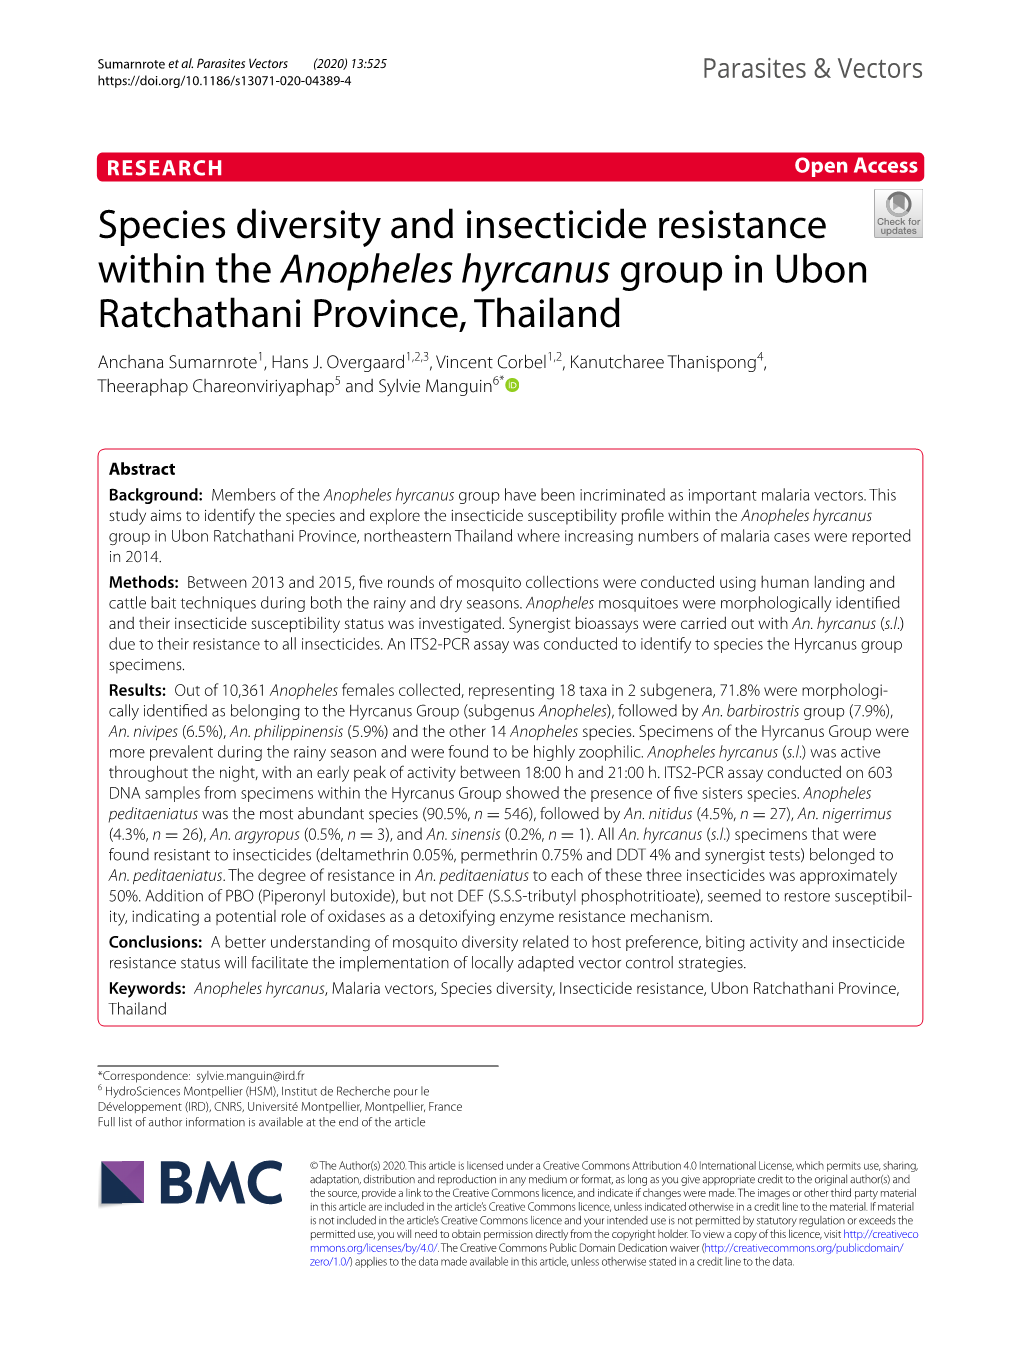 Species Diversity and Insecticide Resistance Within the Anopheles Hyrcanus Group in Ubon Ratchathani Province, Thailand Anchana Sumarnrote1, Hans J